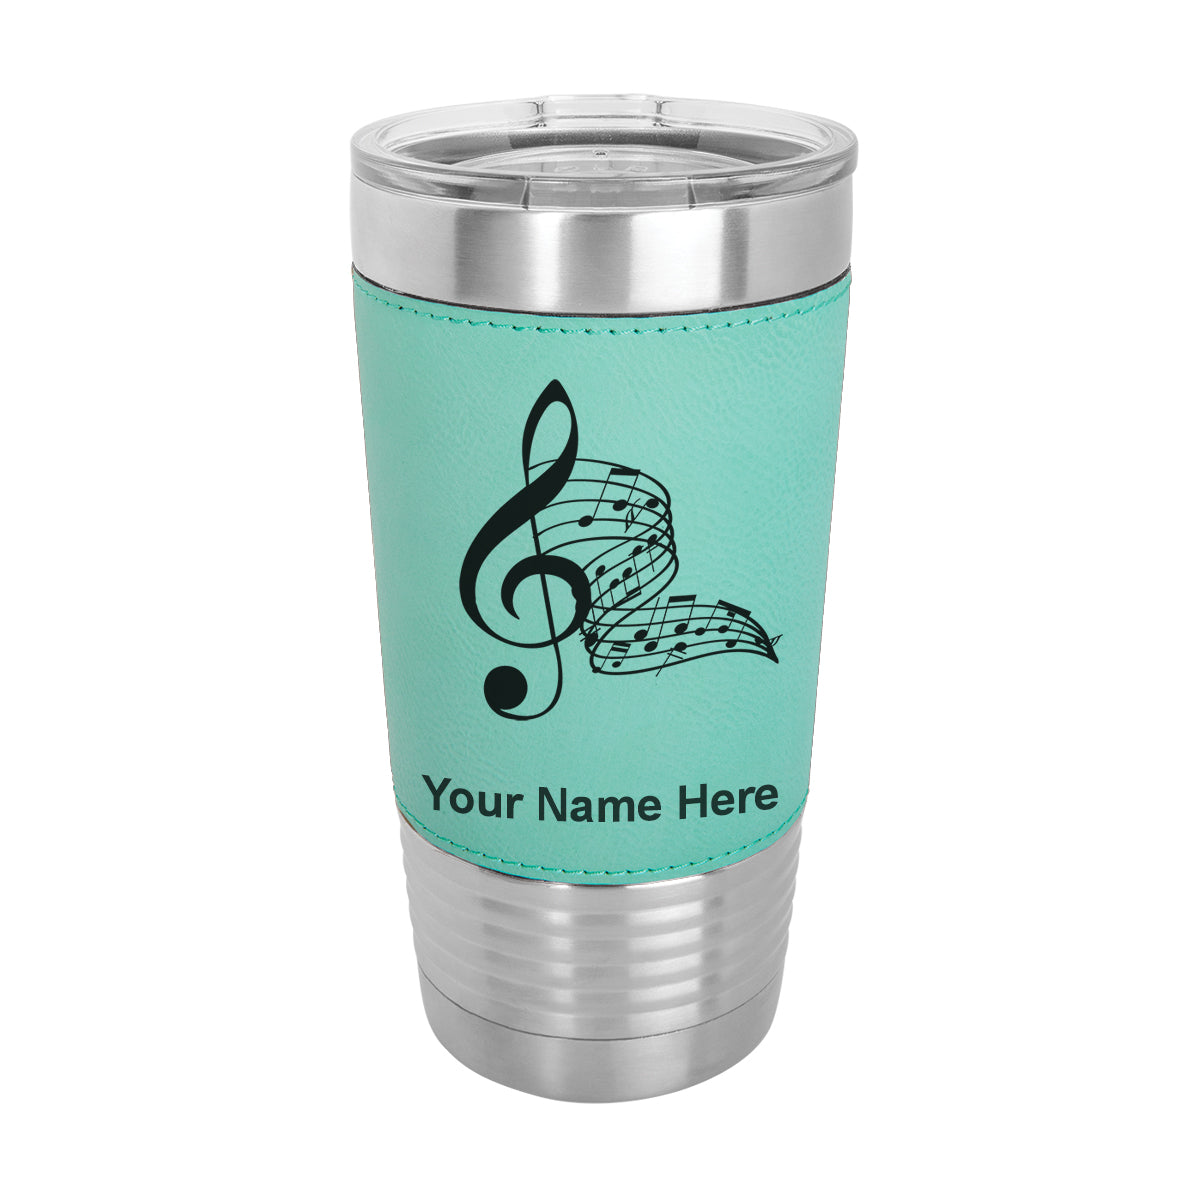 20oz Faux Leather Tumbler Mug, Musical Notes, Personalized Engraving Included - LaserGram Custom Engraved Gifts